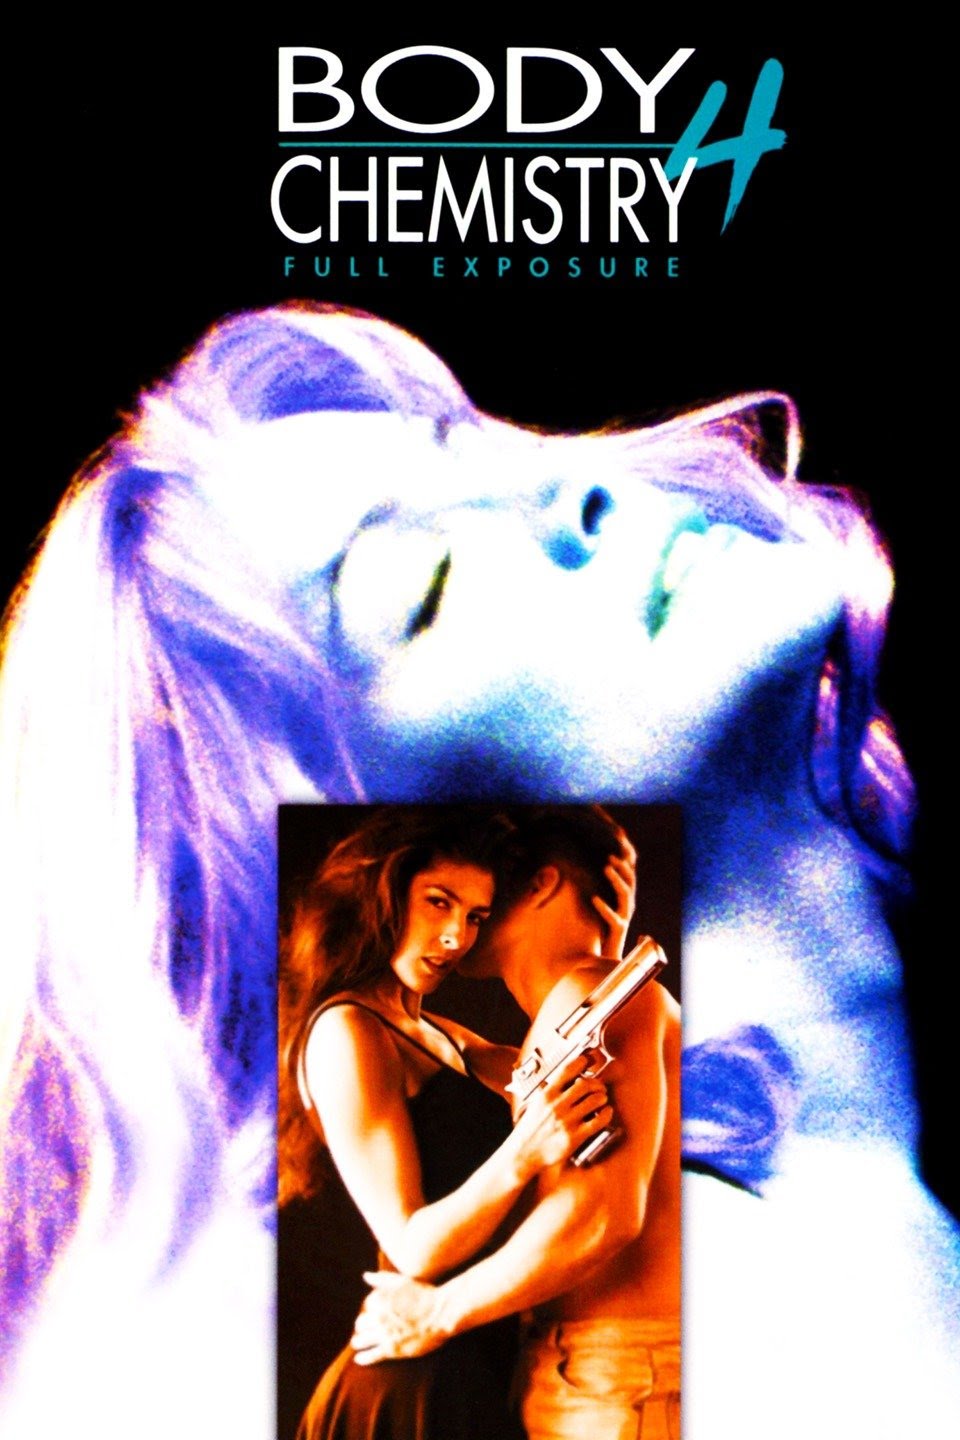 Download [18+] Body Chemistry 4: Full Exposure (1995) UNRATED DVDRip [In English] Erotic Movie 720p | 480p